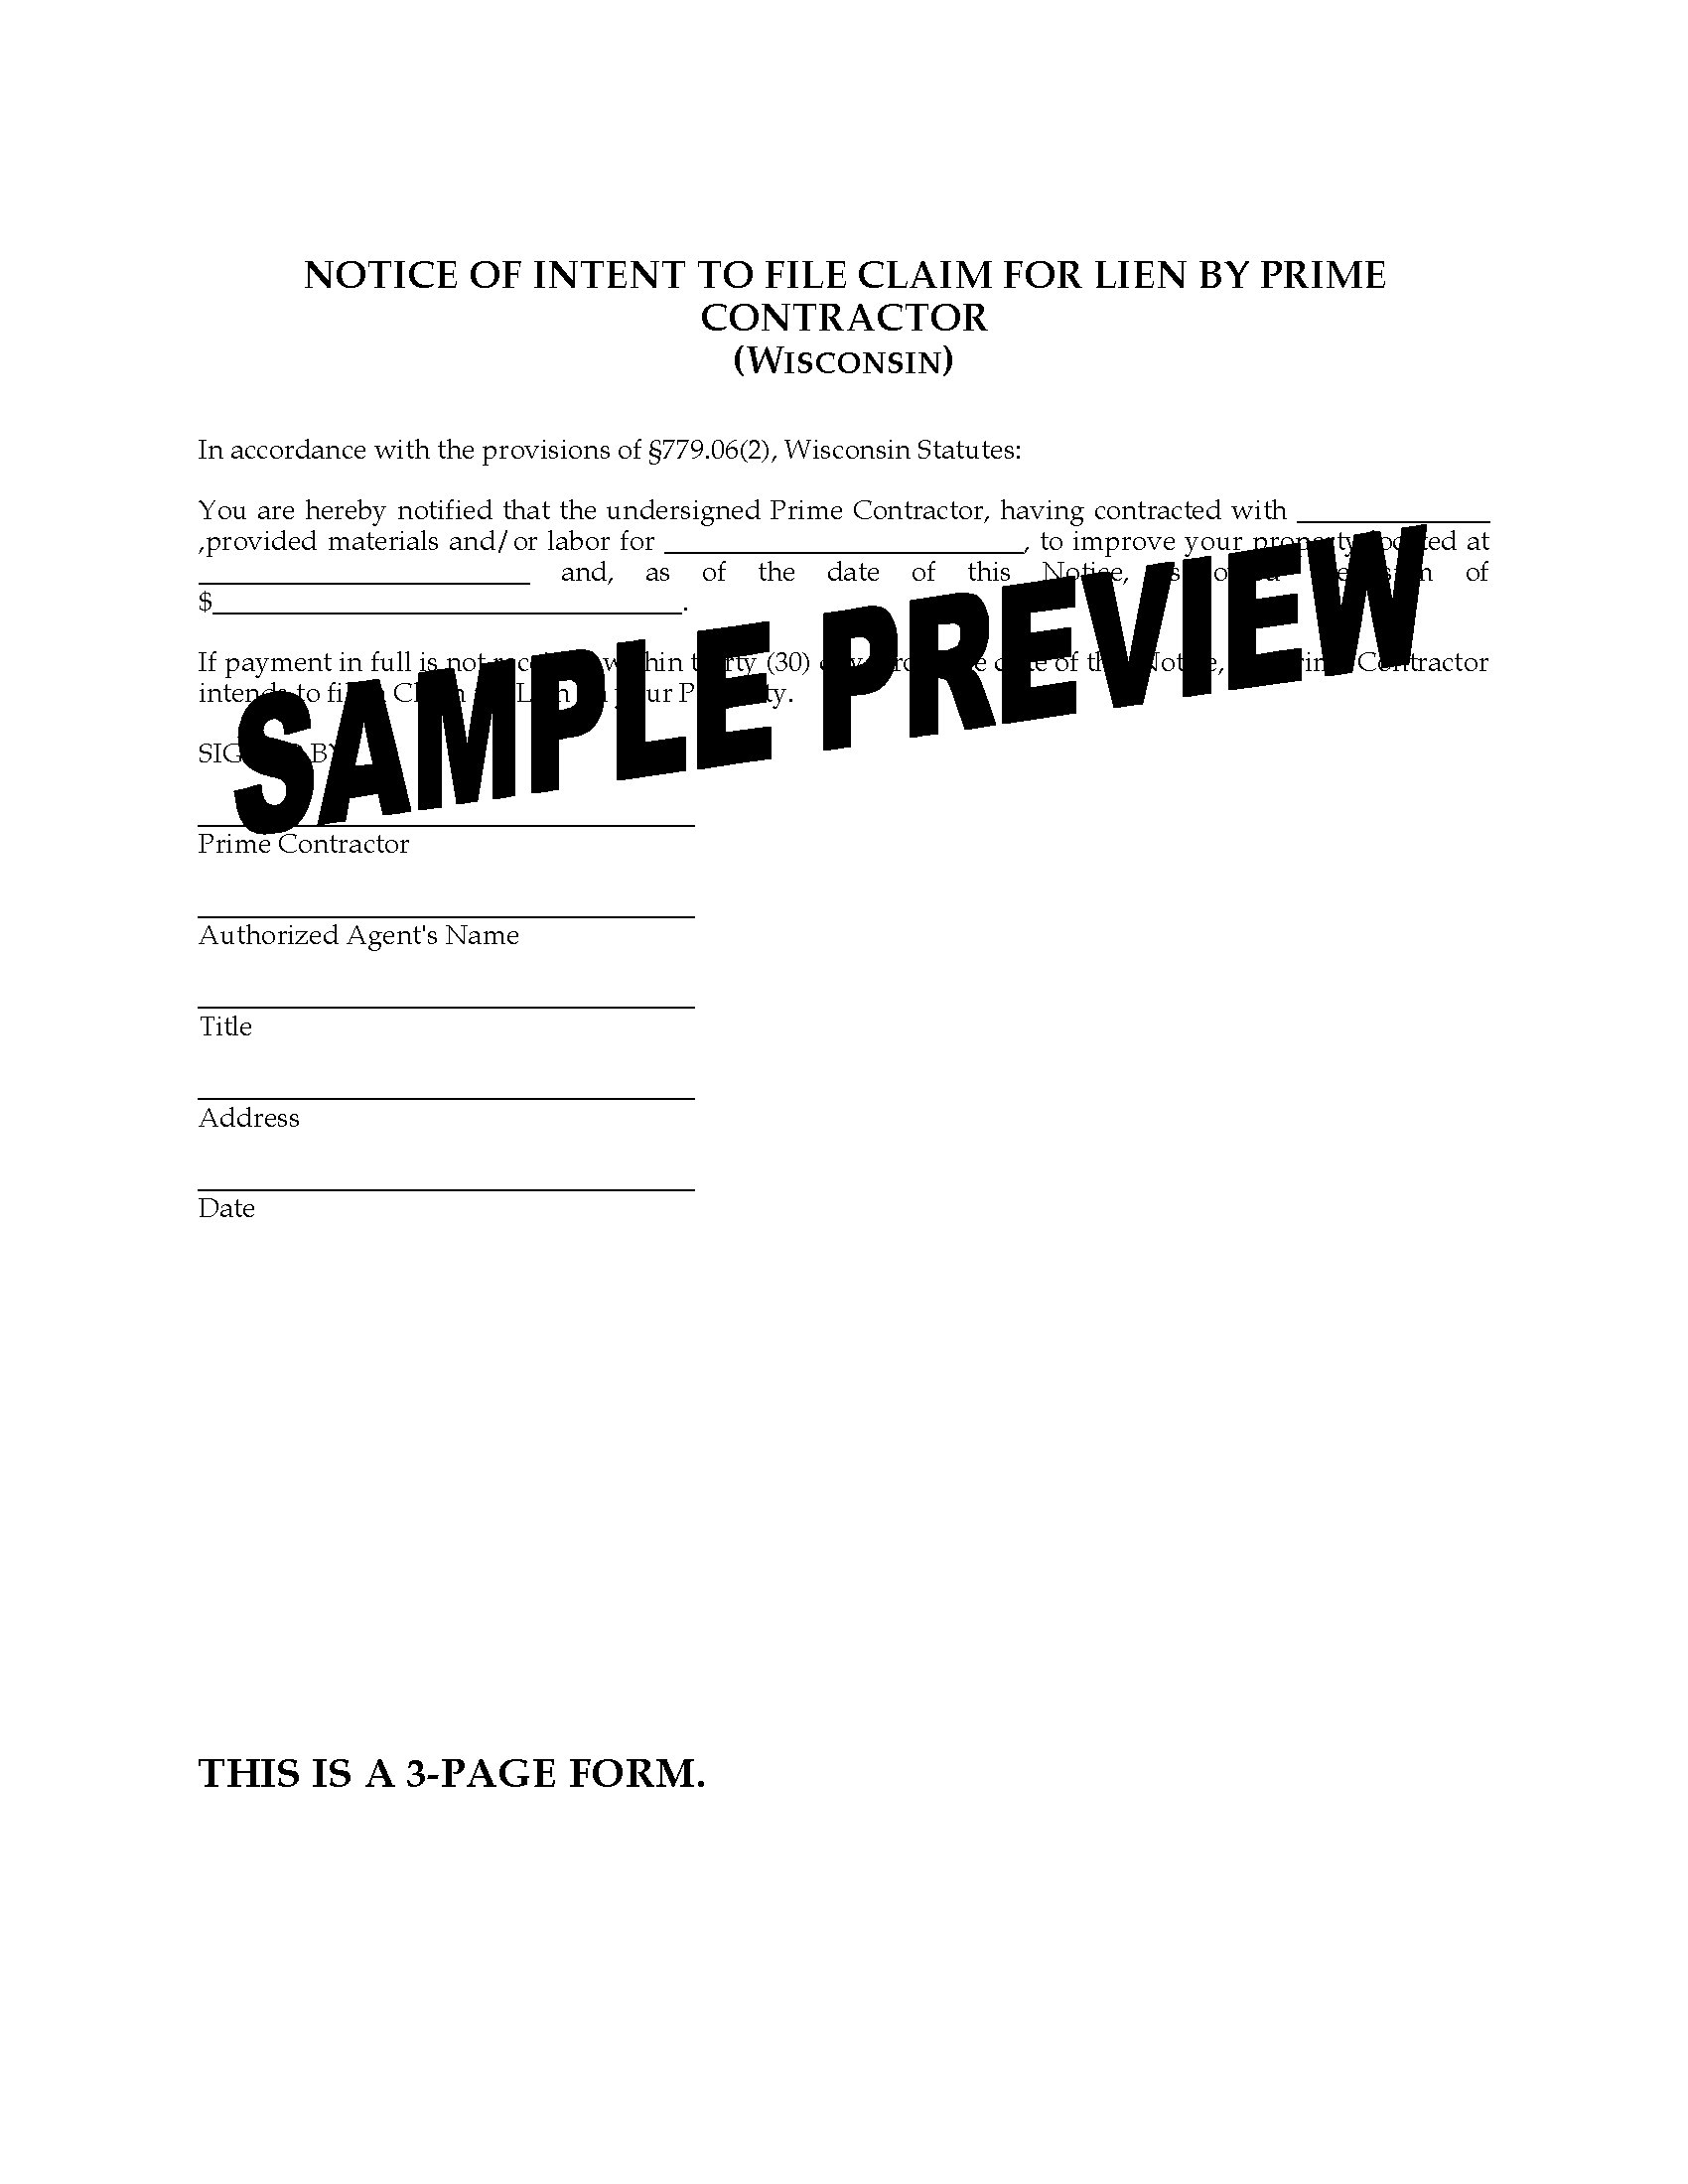 Letter Of Intent to File A Lien Template - Letter Intent to File Lien Inspirations In Texas Sample A